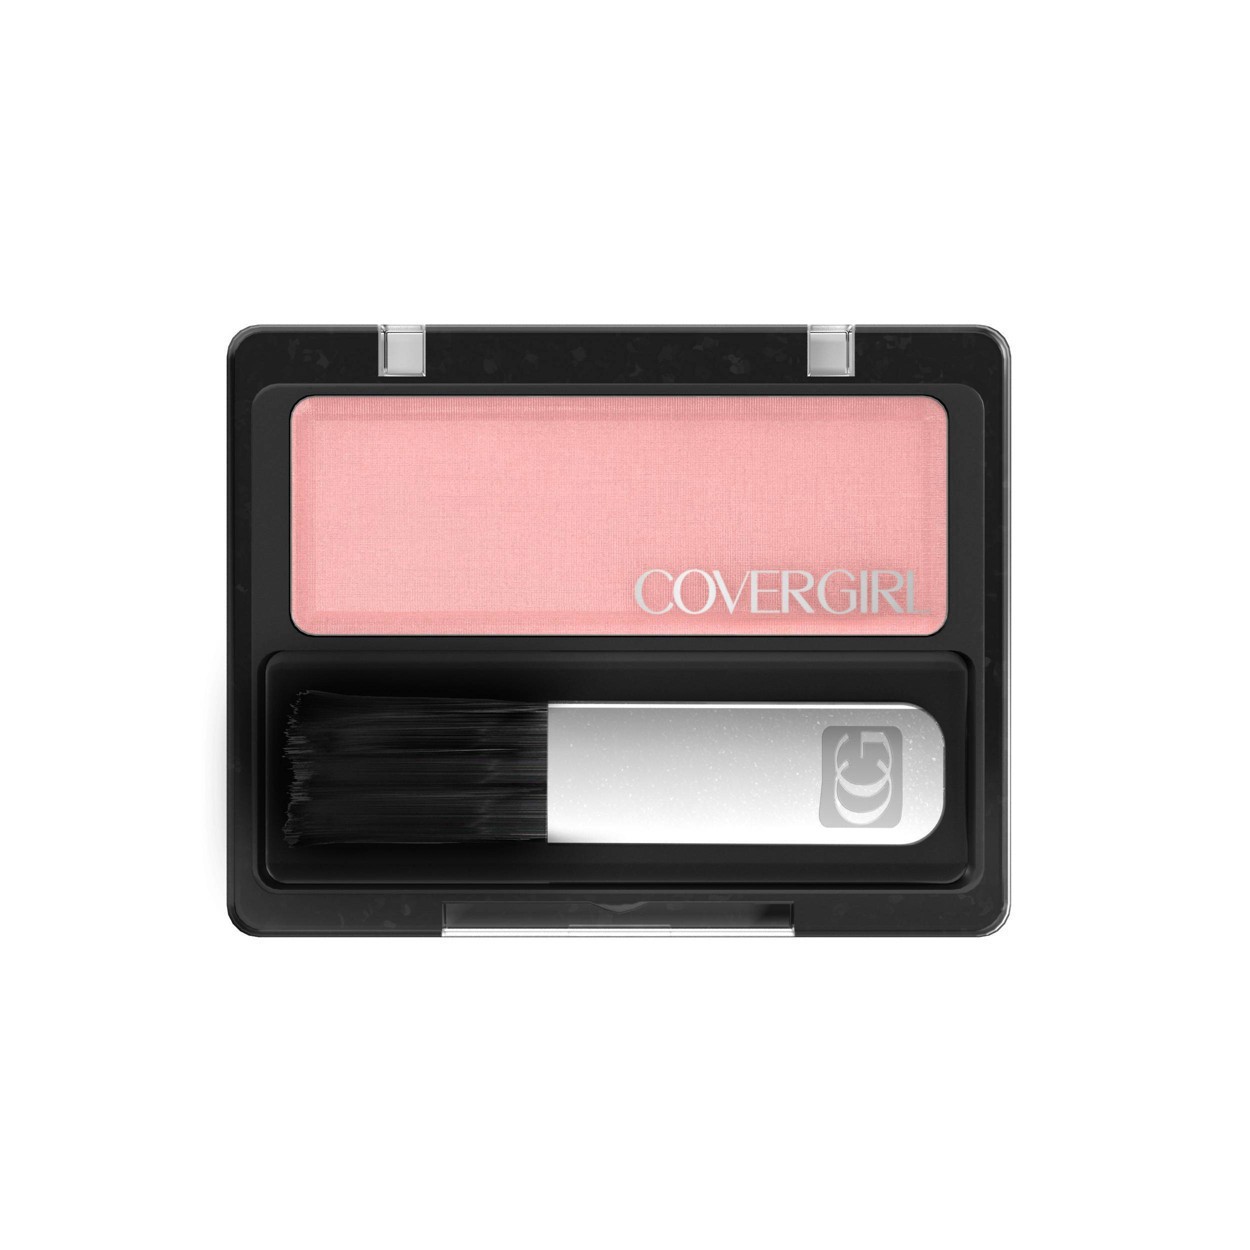 slide 32 of 42, Covergirl COVERGIRL Classic Color Blush Rose Silk, 1 ct